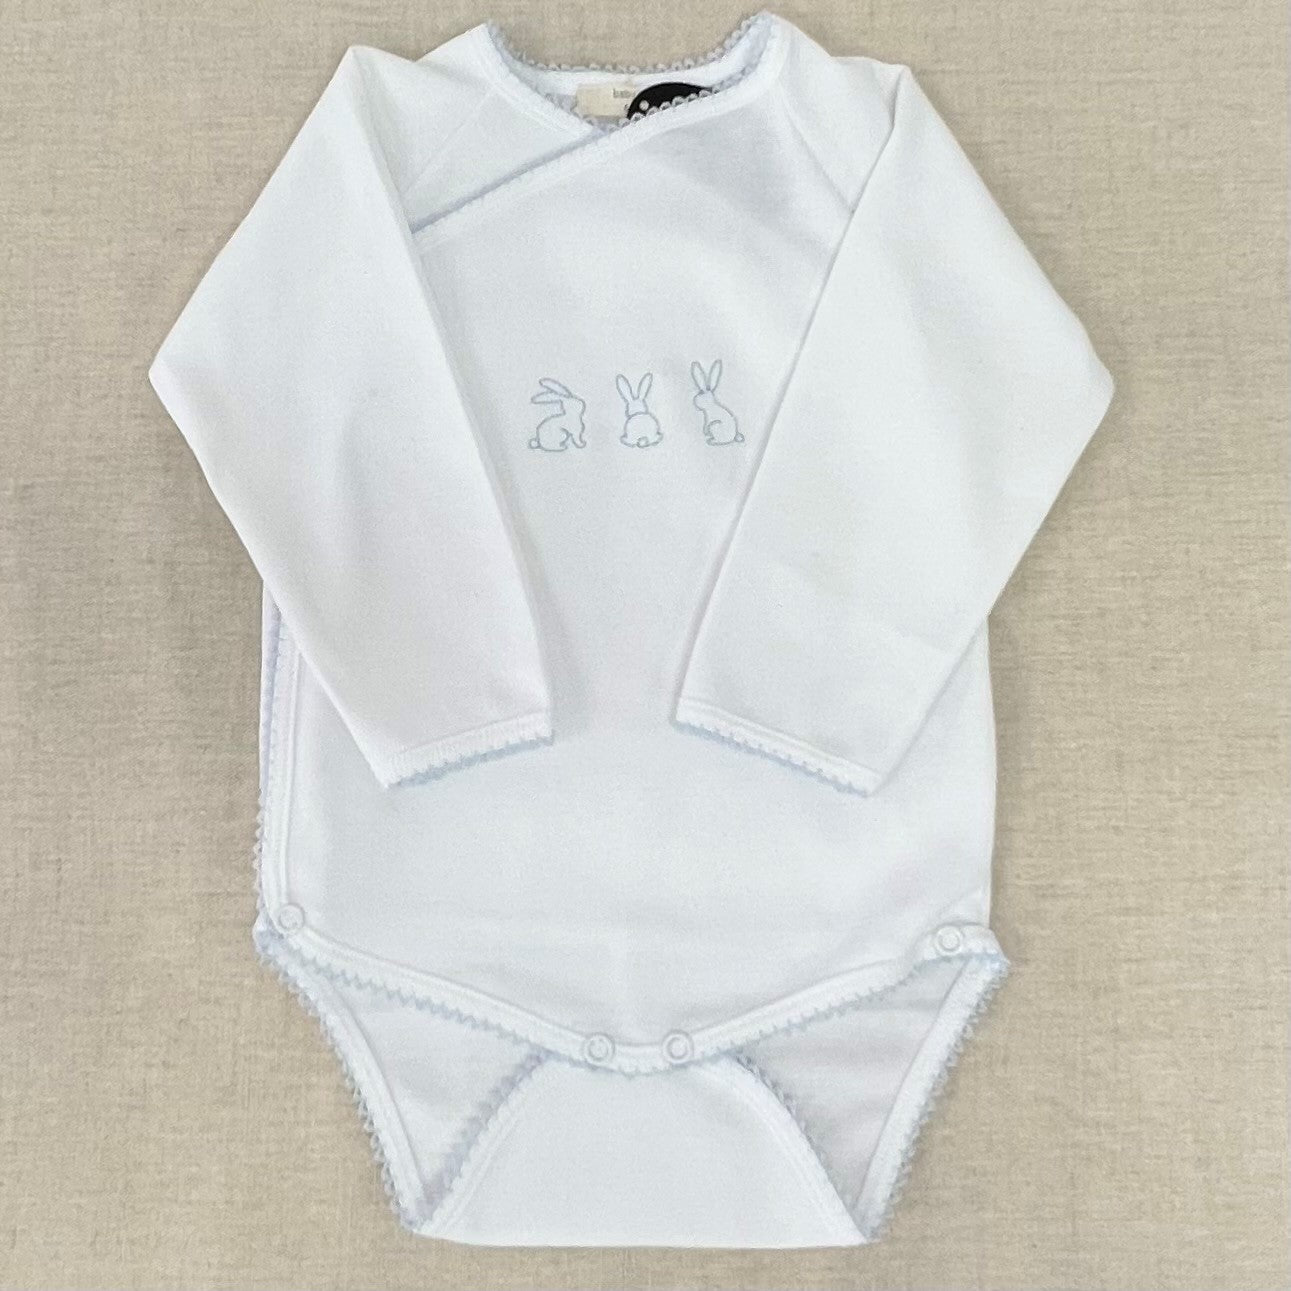 Baby Suit Long White With Blue Embroidery 3-6 months